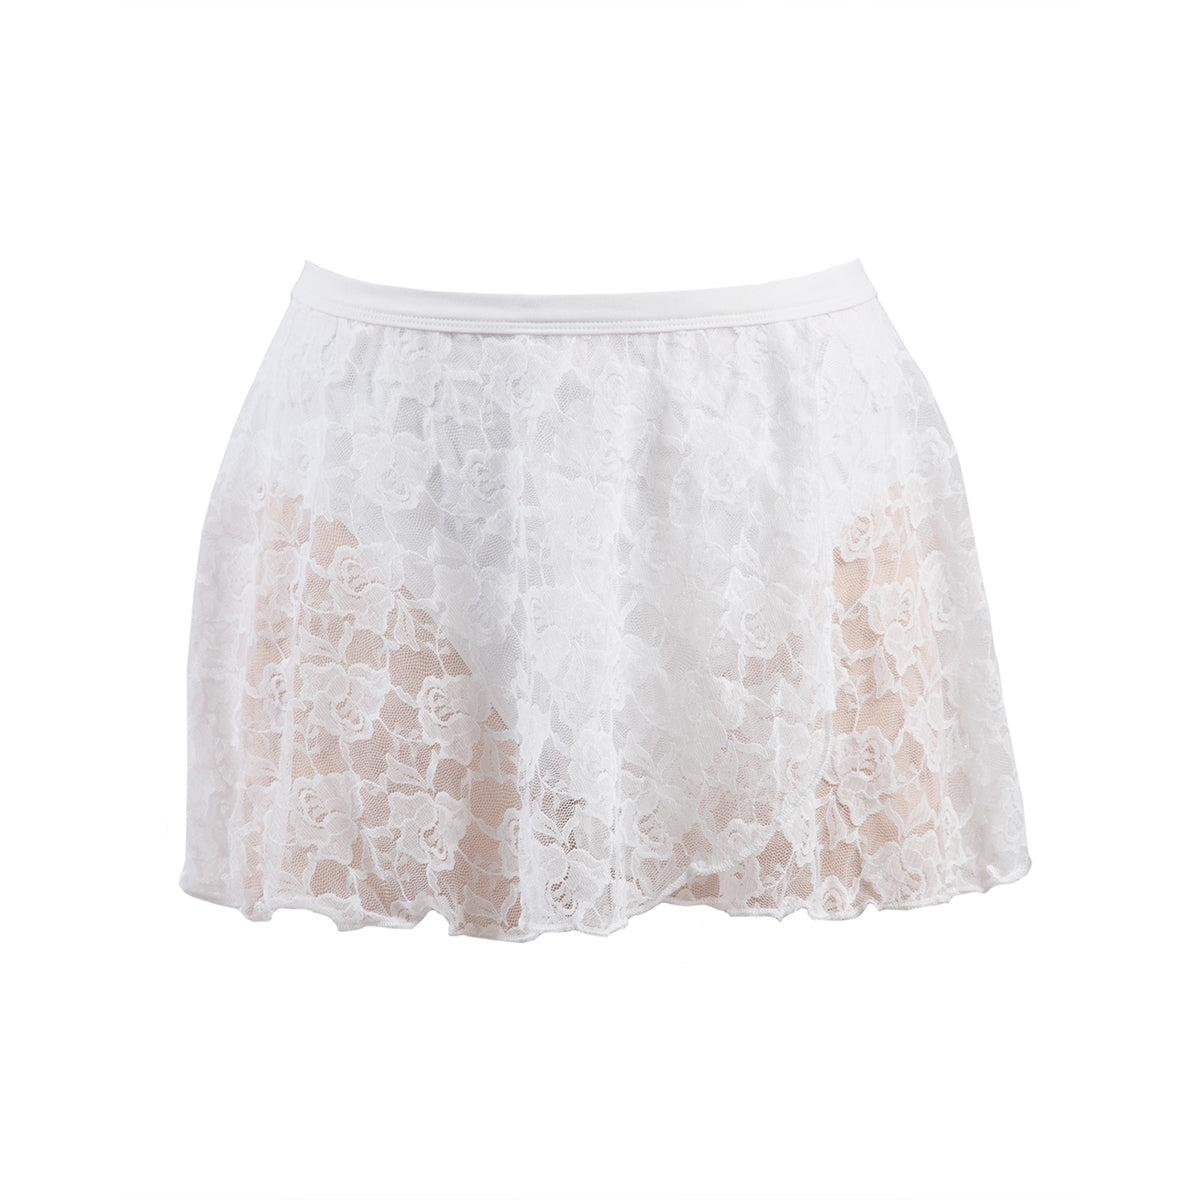 Melody Lace Skirt - Adult